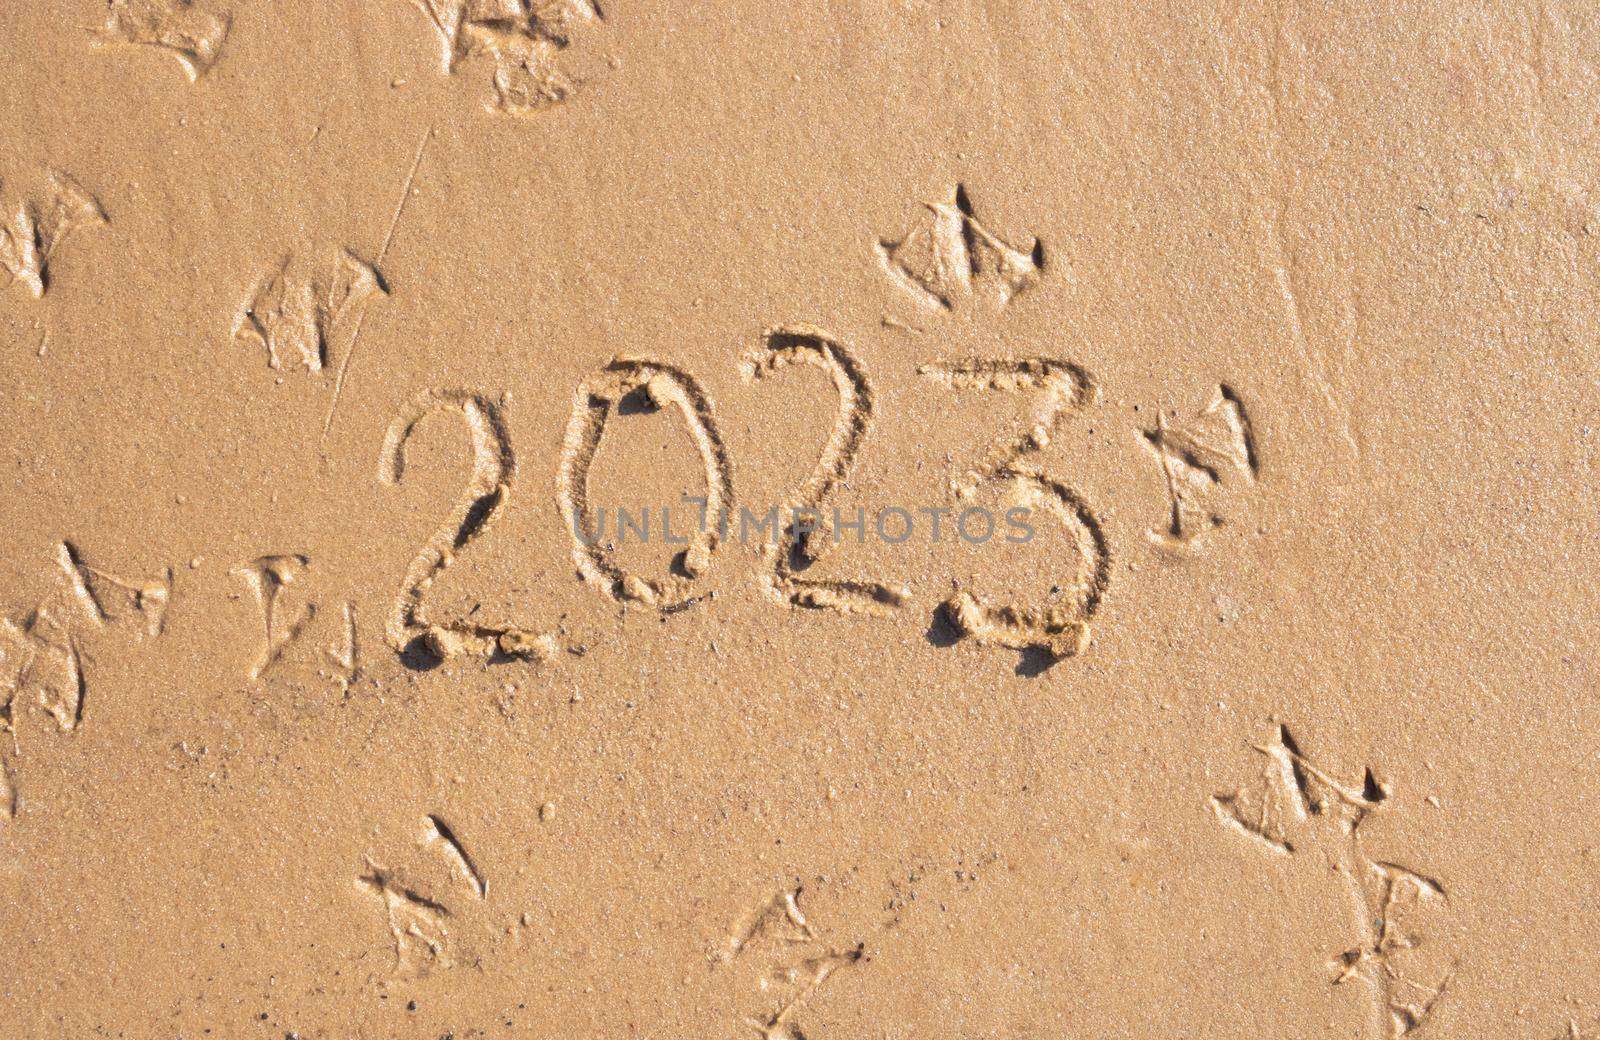 The numbers 2023 are written on the sand on the beach. The concept of the New Year. Happy New Year 2023 background. Travel during the Christmas holidays.